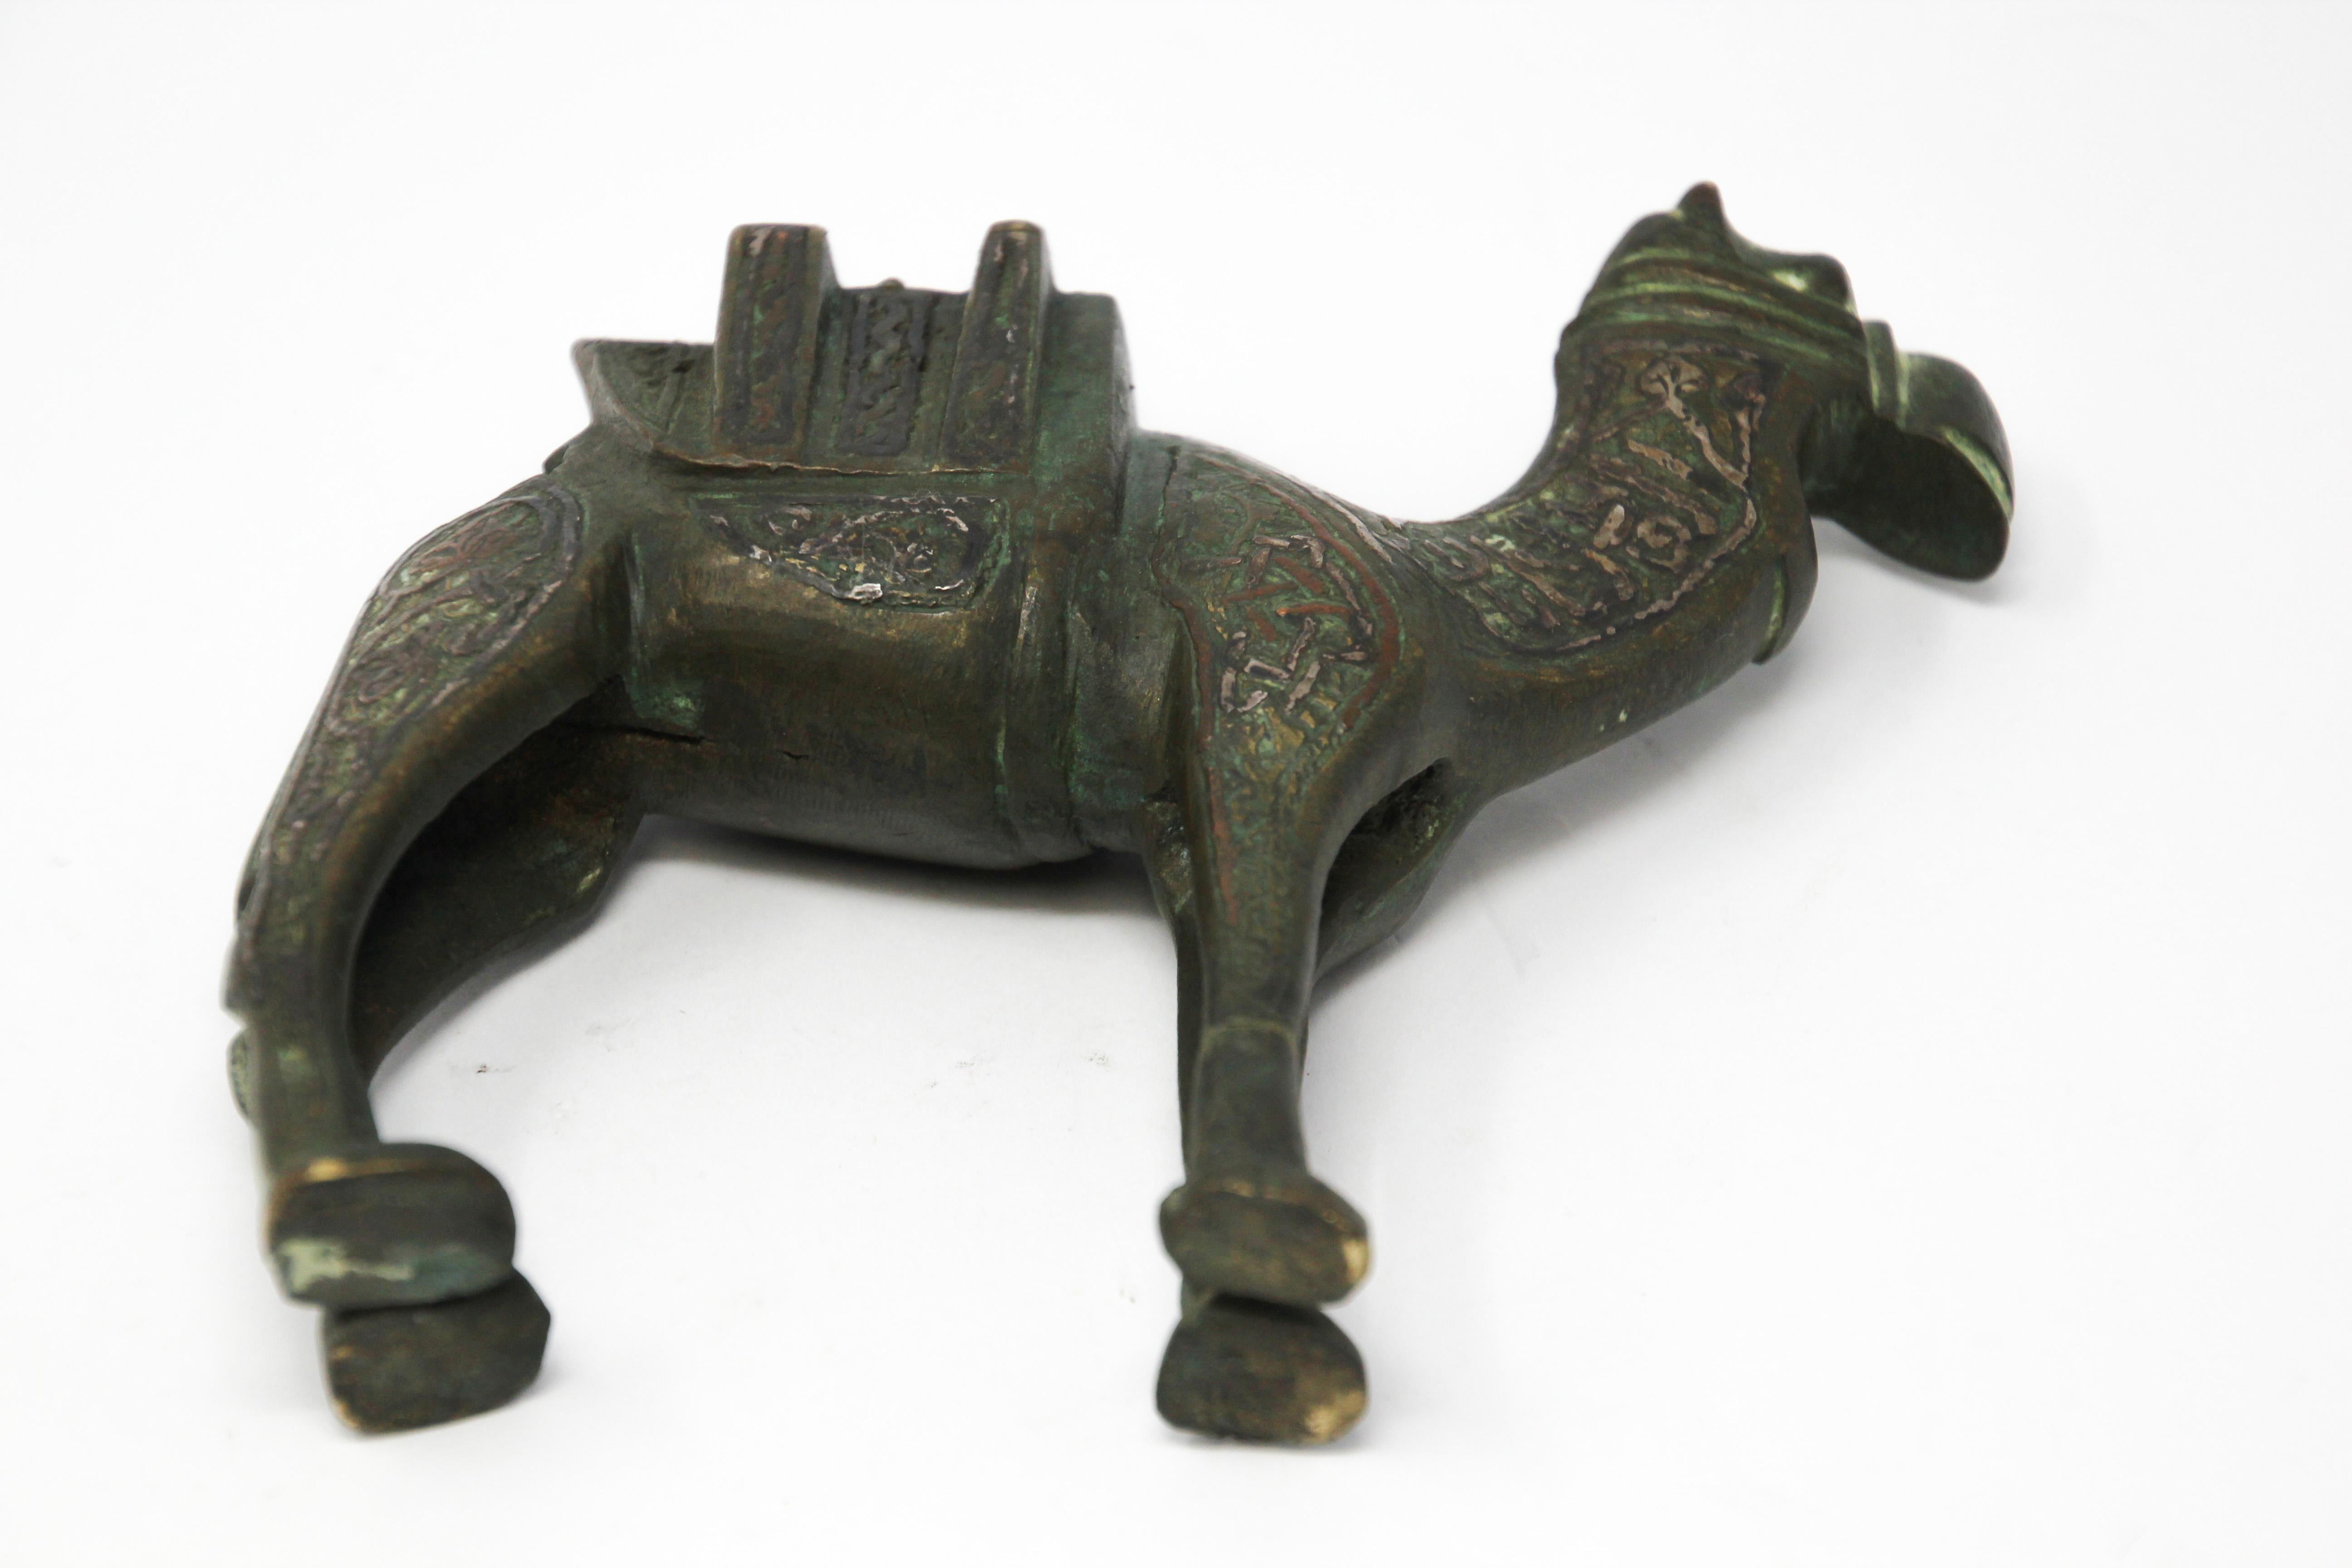 1920 Cast Bronze Camel Sculpture In Good Condition For Sale In North Hollywood, CA